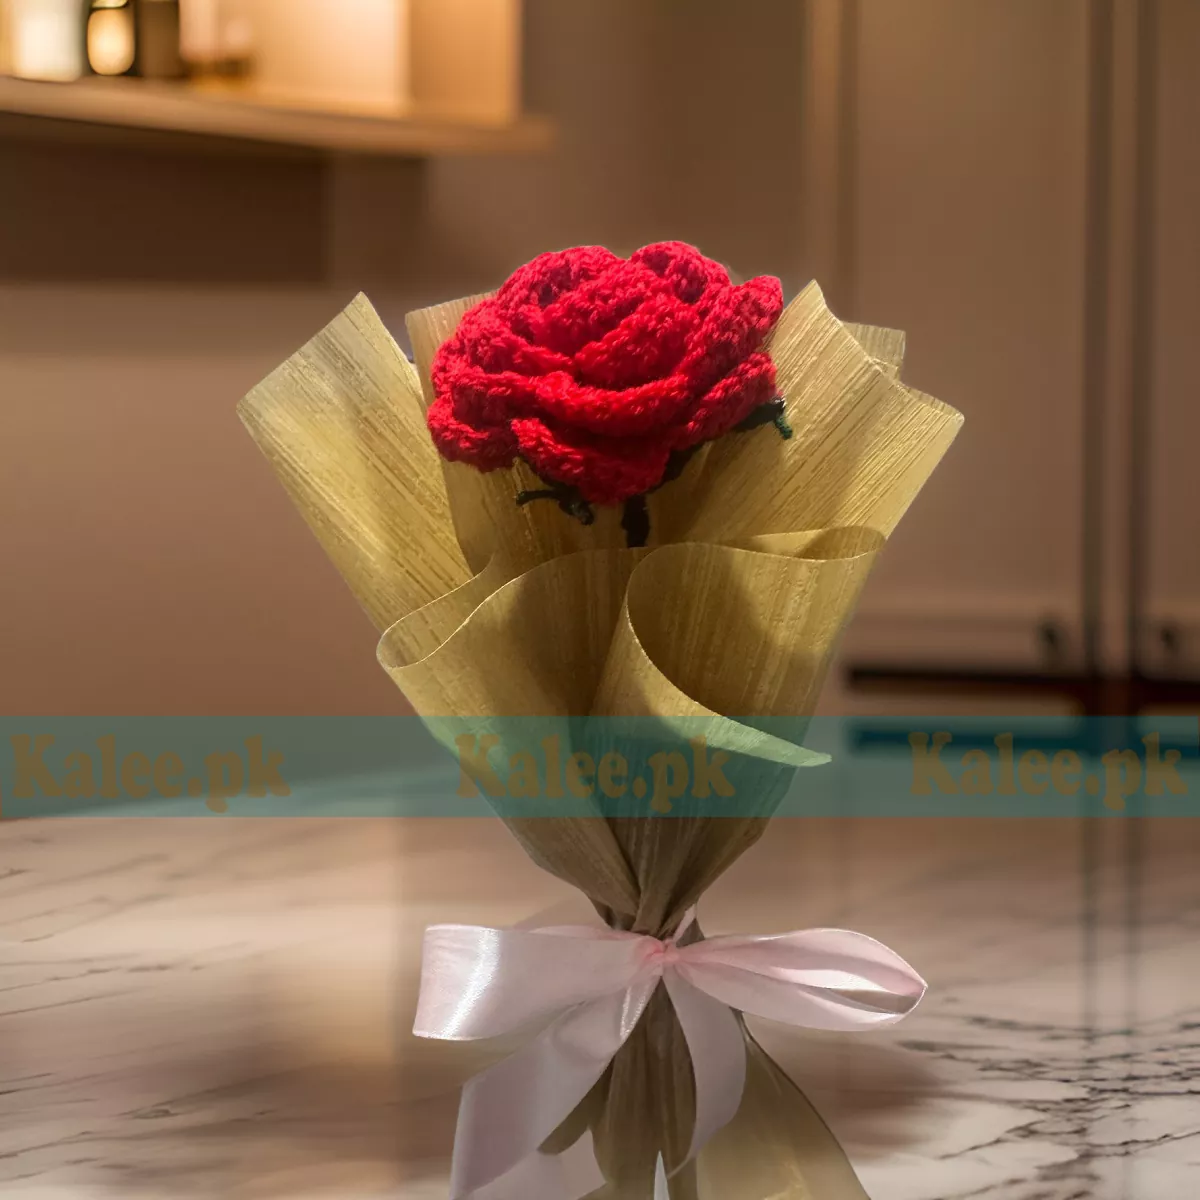 A divinely crafted crochet bouquet featuring handmade red roses, exuding floral grace for expressions of love